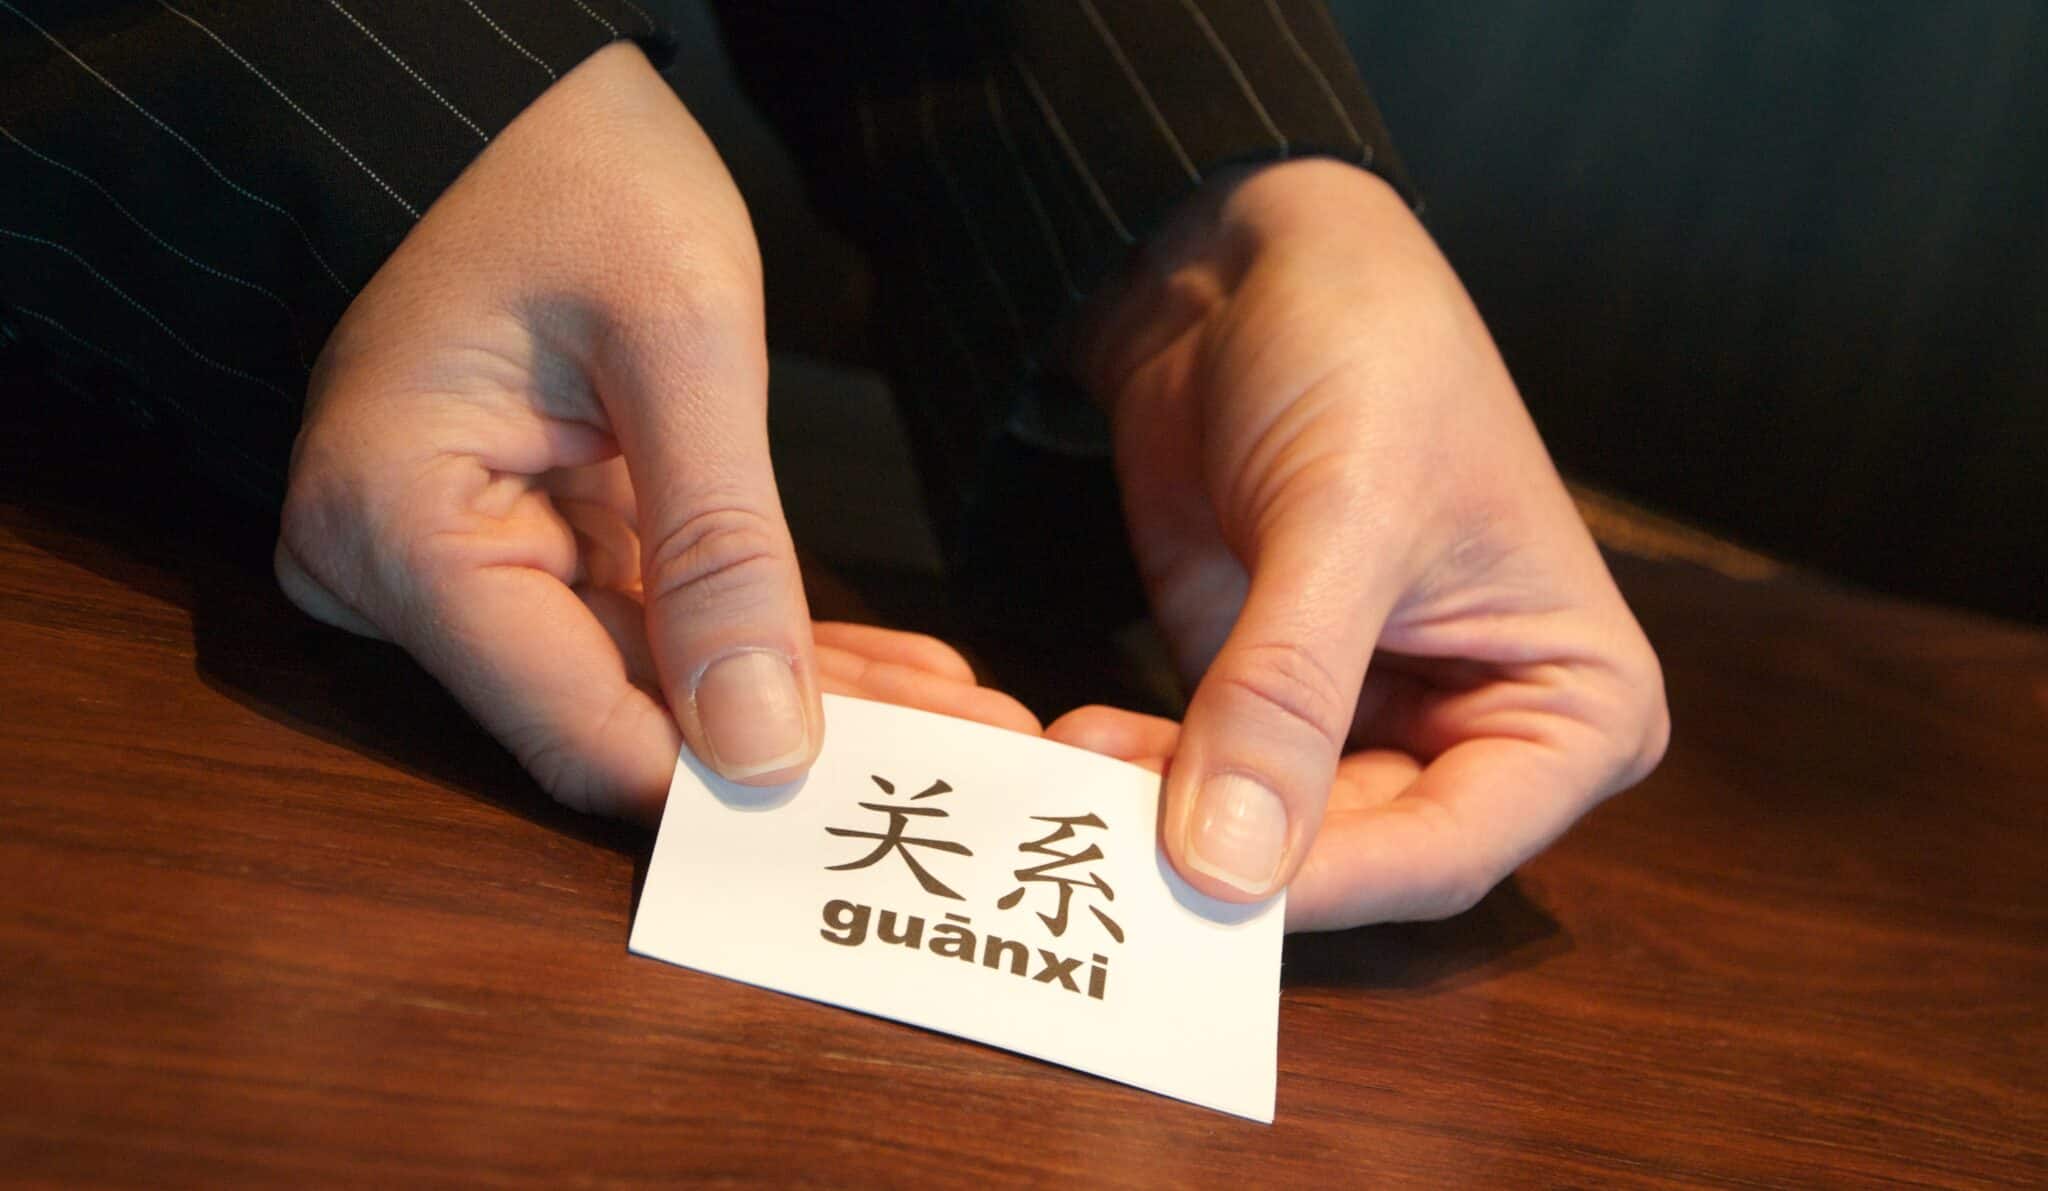 <!--:zh-->Guanxi (关系) or Renqing (人情)？